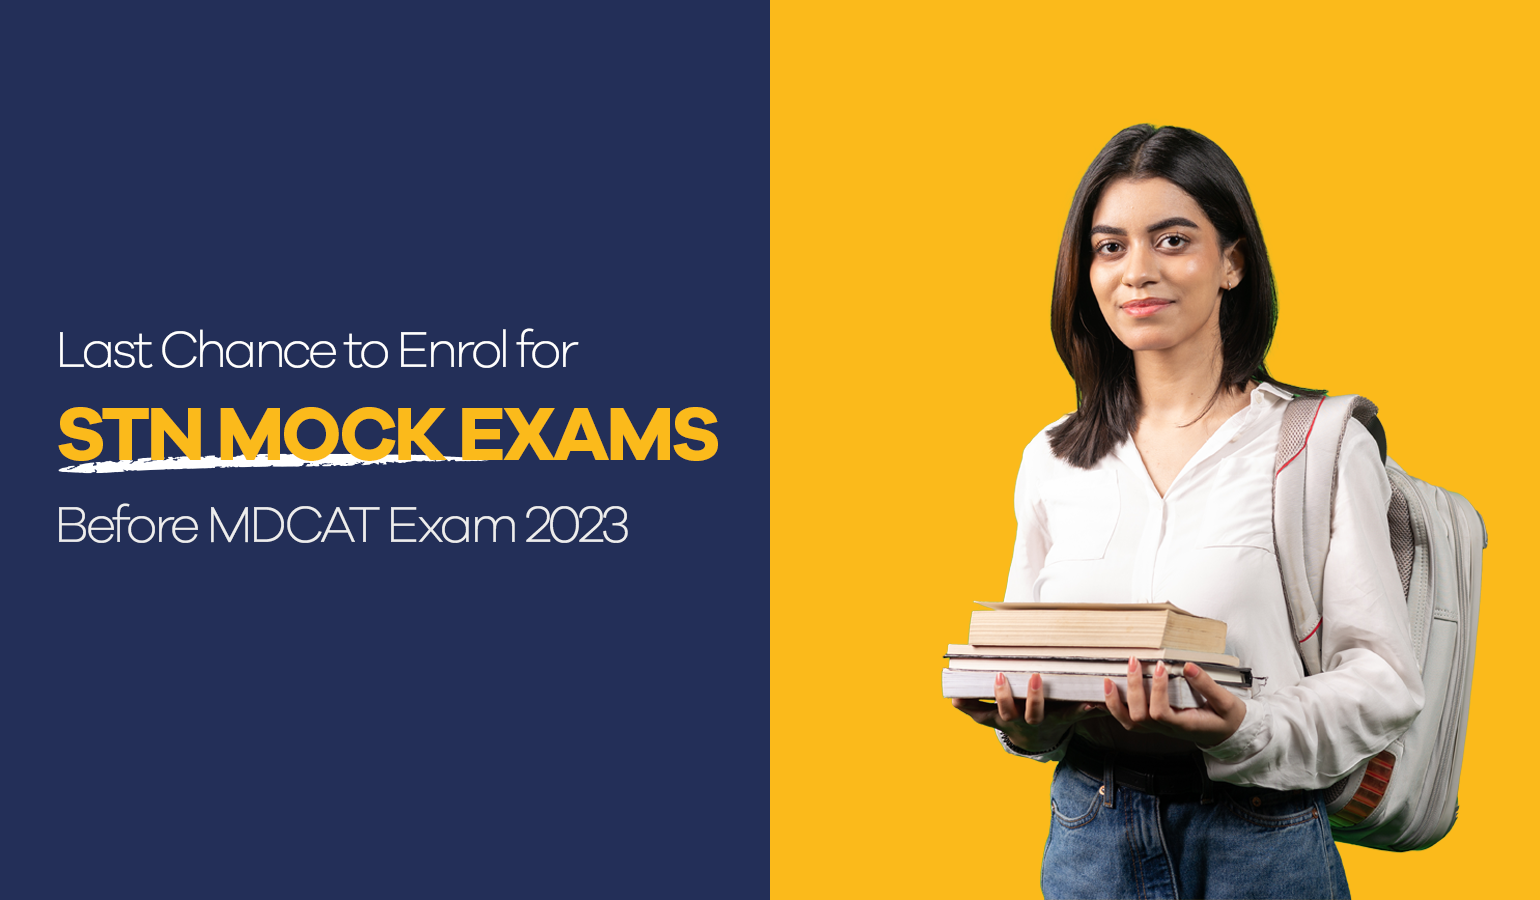 Last Chance to Enrol for STN Mock Exams Before MDCAT Exam 2023